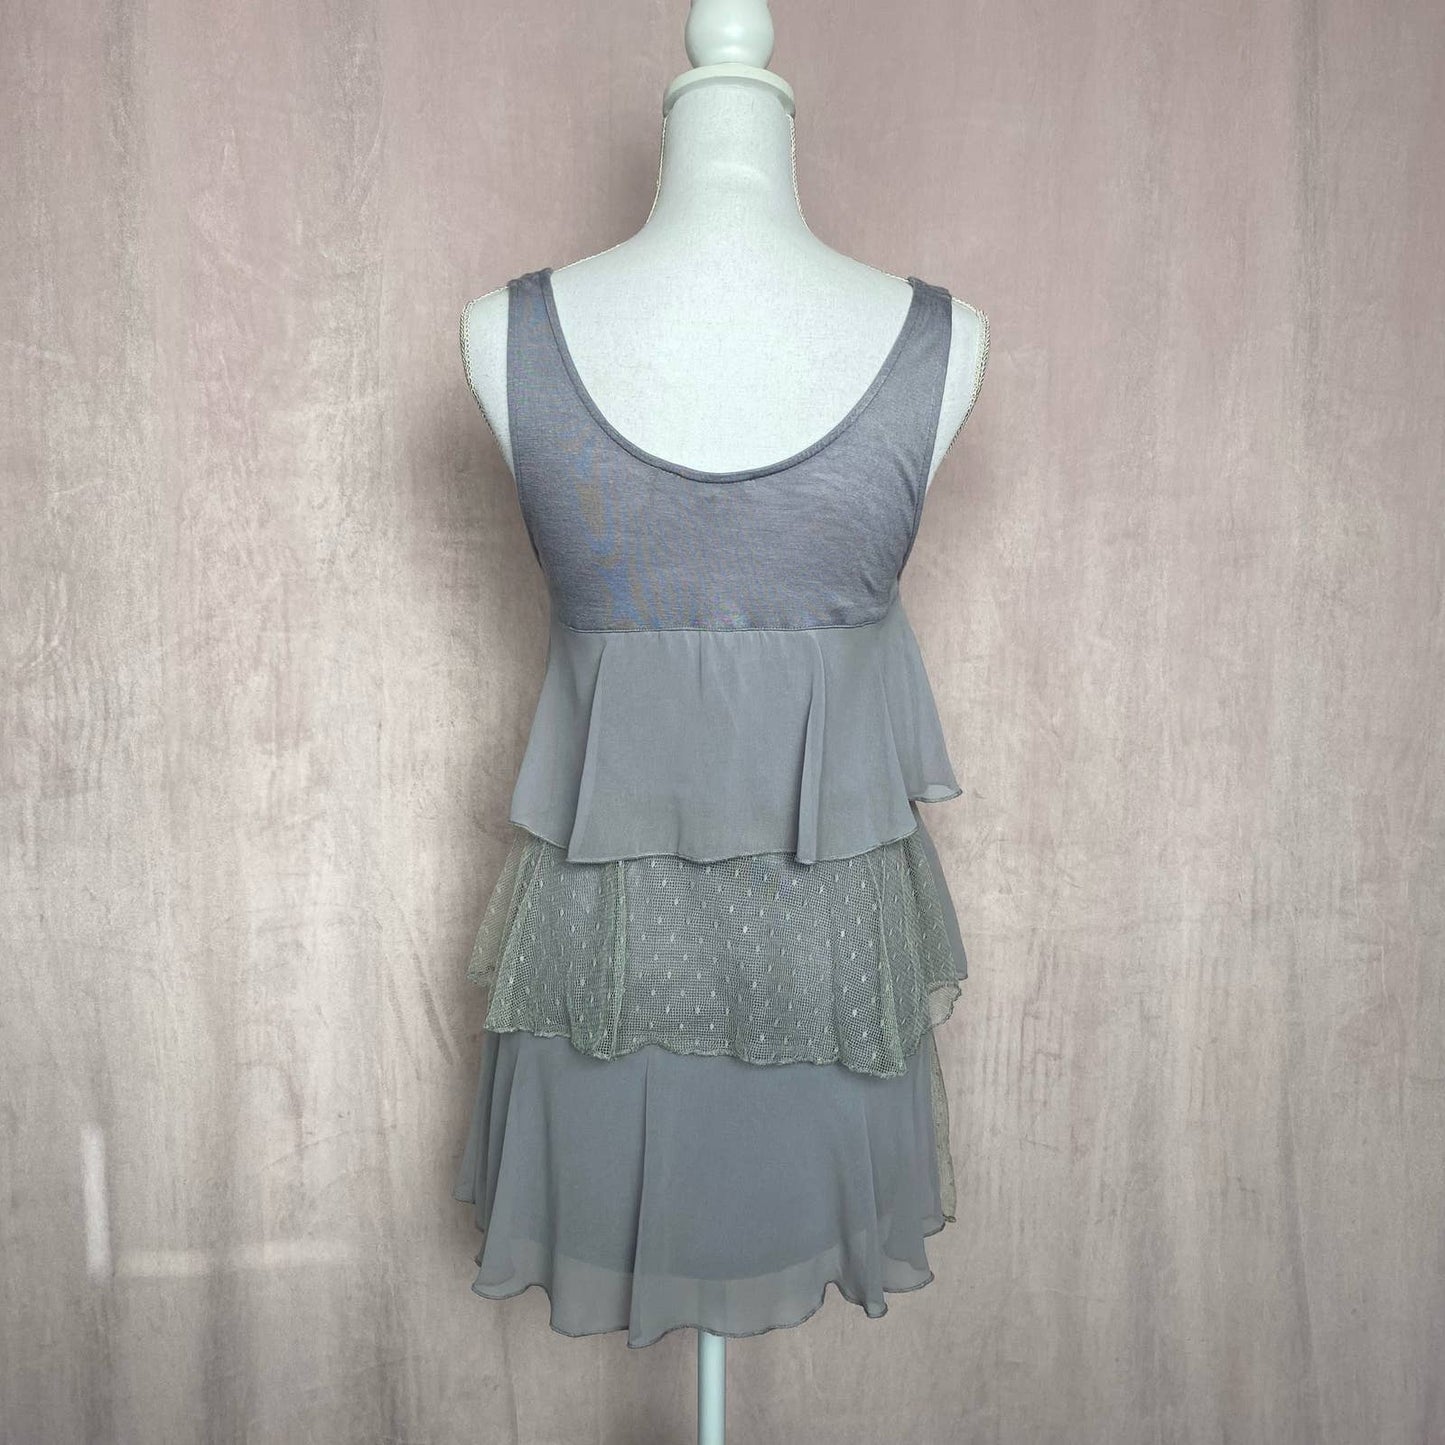 Secondhand Cecico Tiered Ruffle Tank Top Mini Dress, Size Small